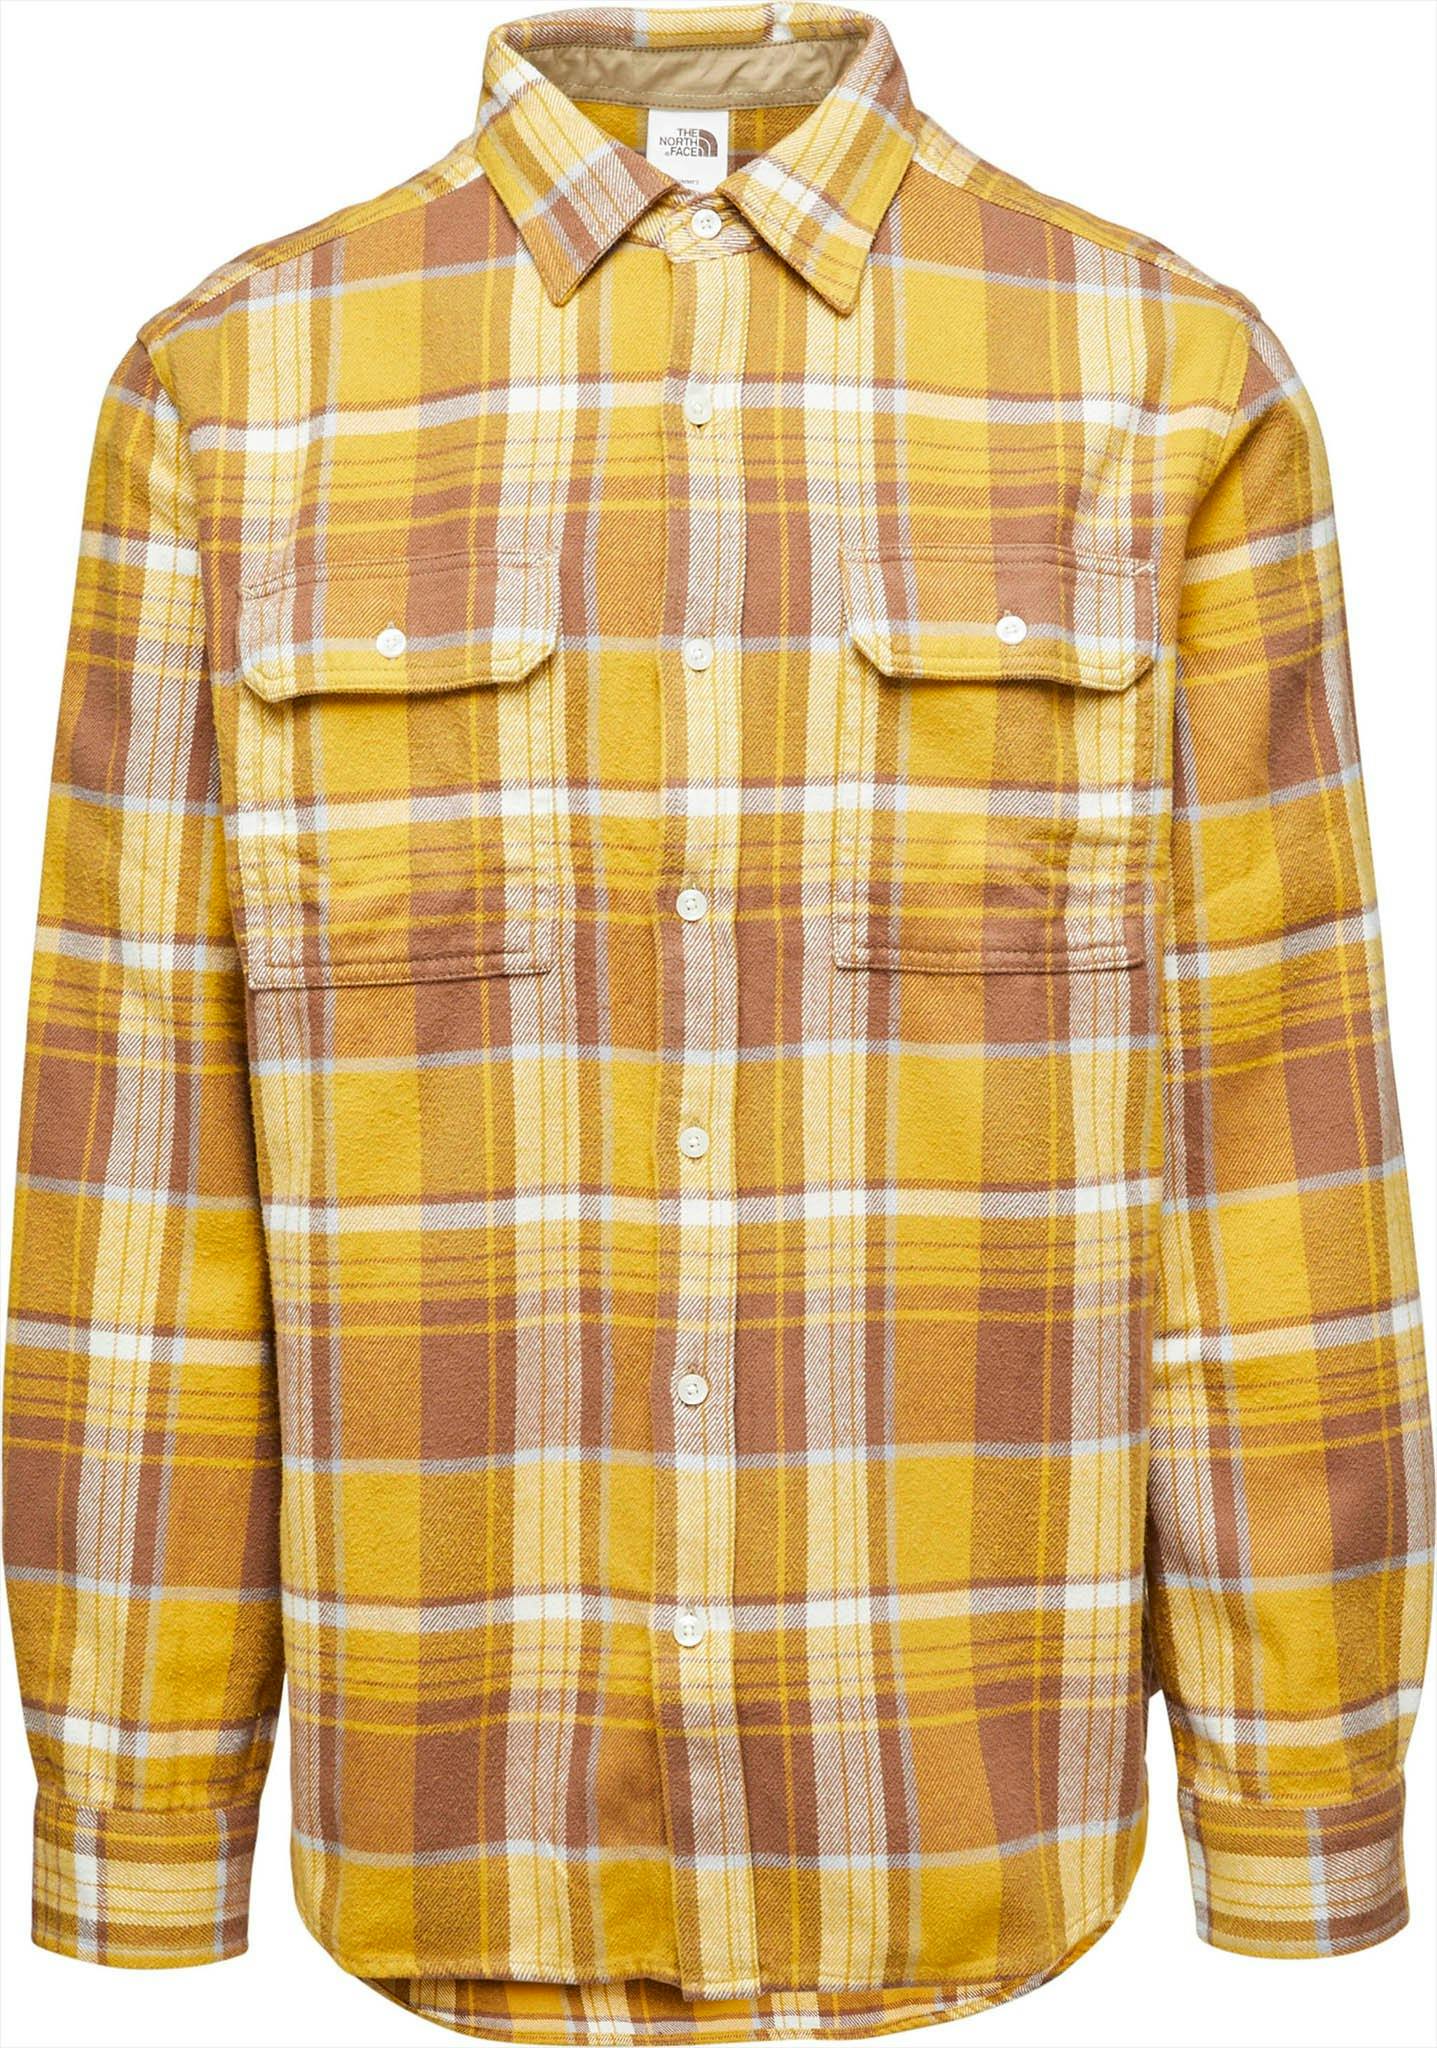 Product image for Arroyo Flannel Shirt - Men's